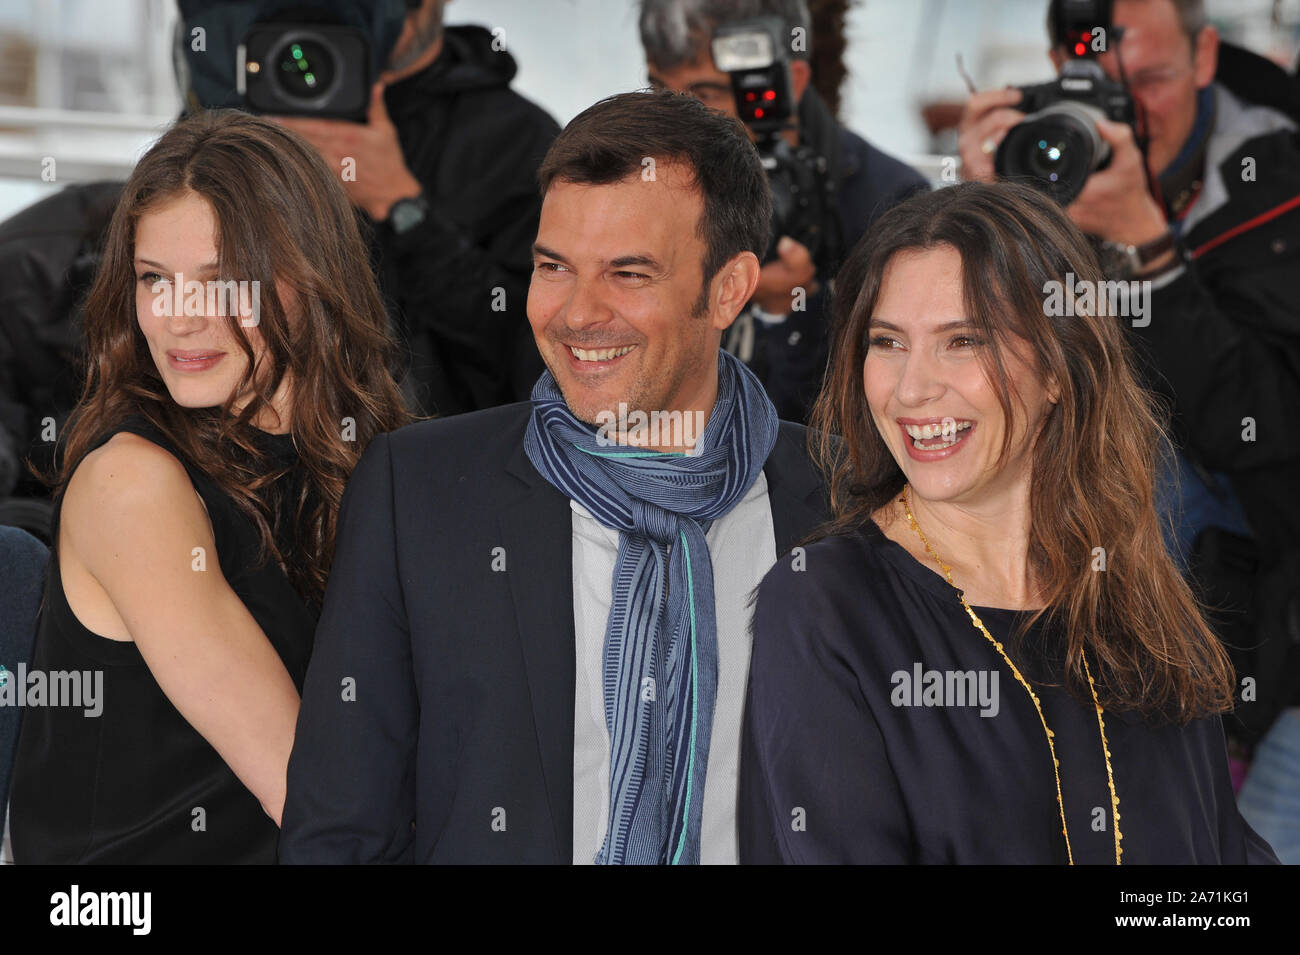 CANNES, FRANCE. May 16, 2013: Marine Vacth, director Francois Ozon &  Geraldine Pailhas (right) at the photocall for their movie "Jeune & Jolie"  in competition at the 66th Festival de Cannes. ©